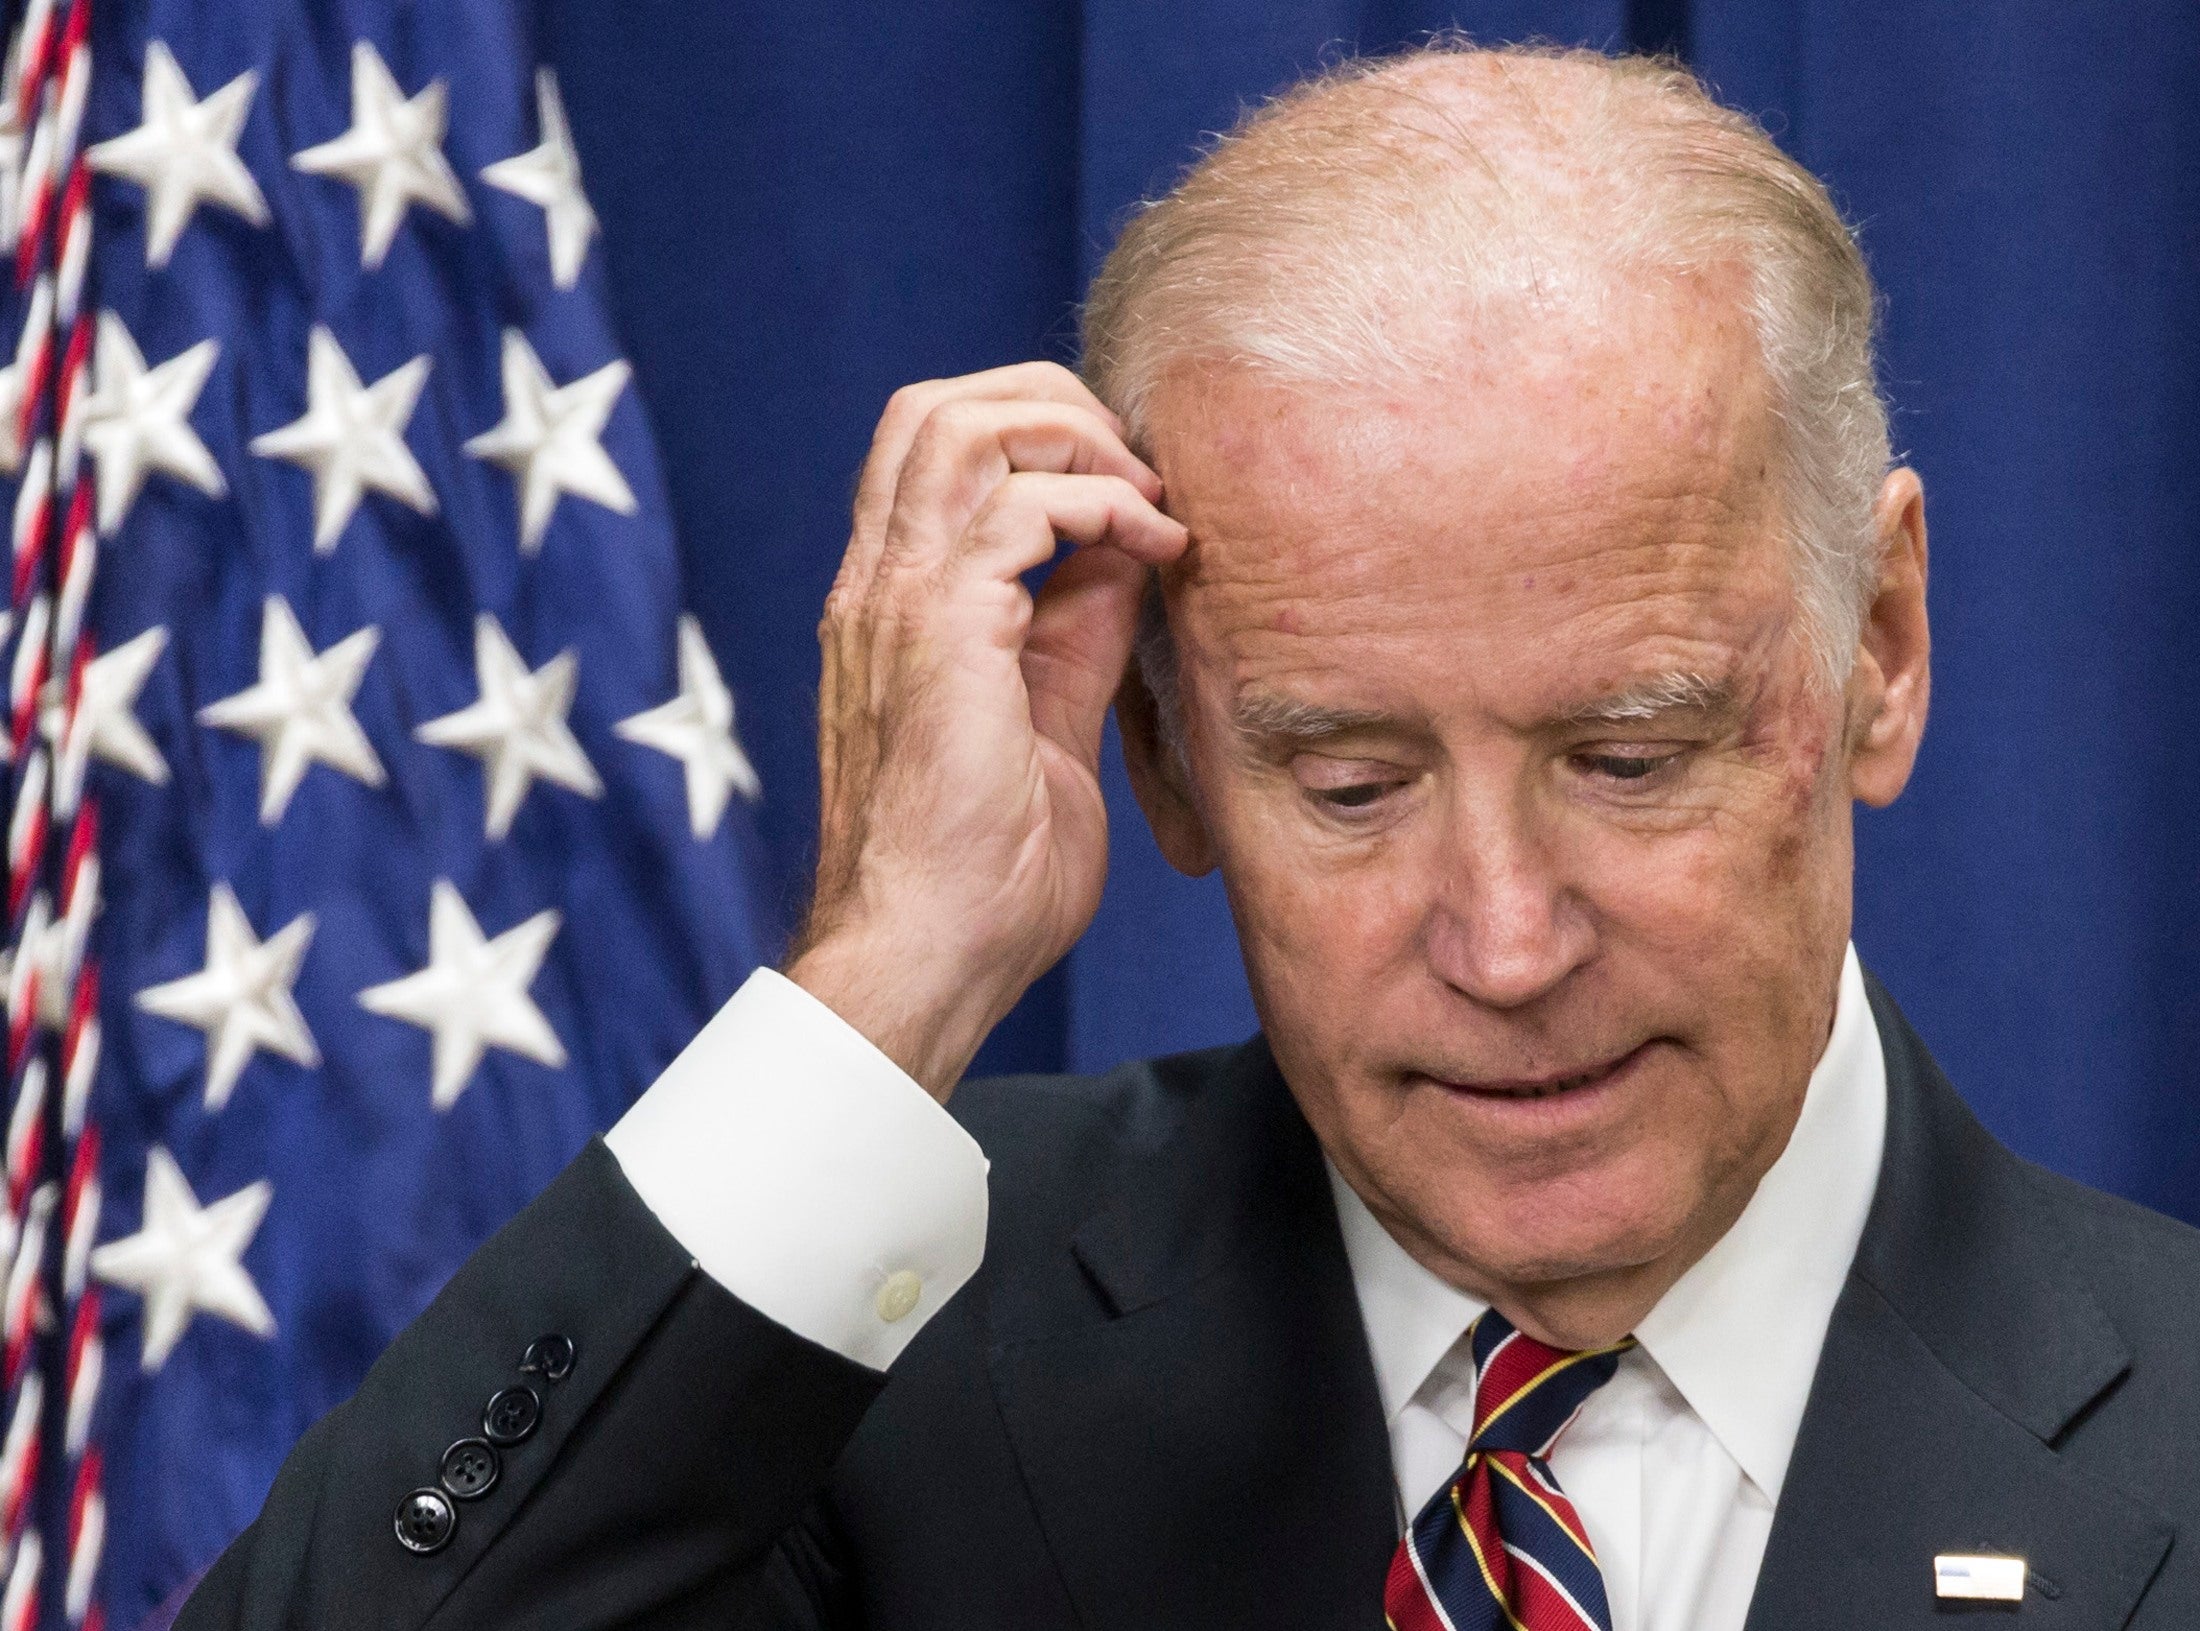 Unexpected radicalism and false promises – How the Biden presidency stacks up so far